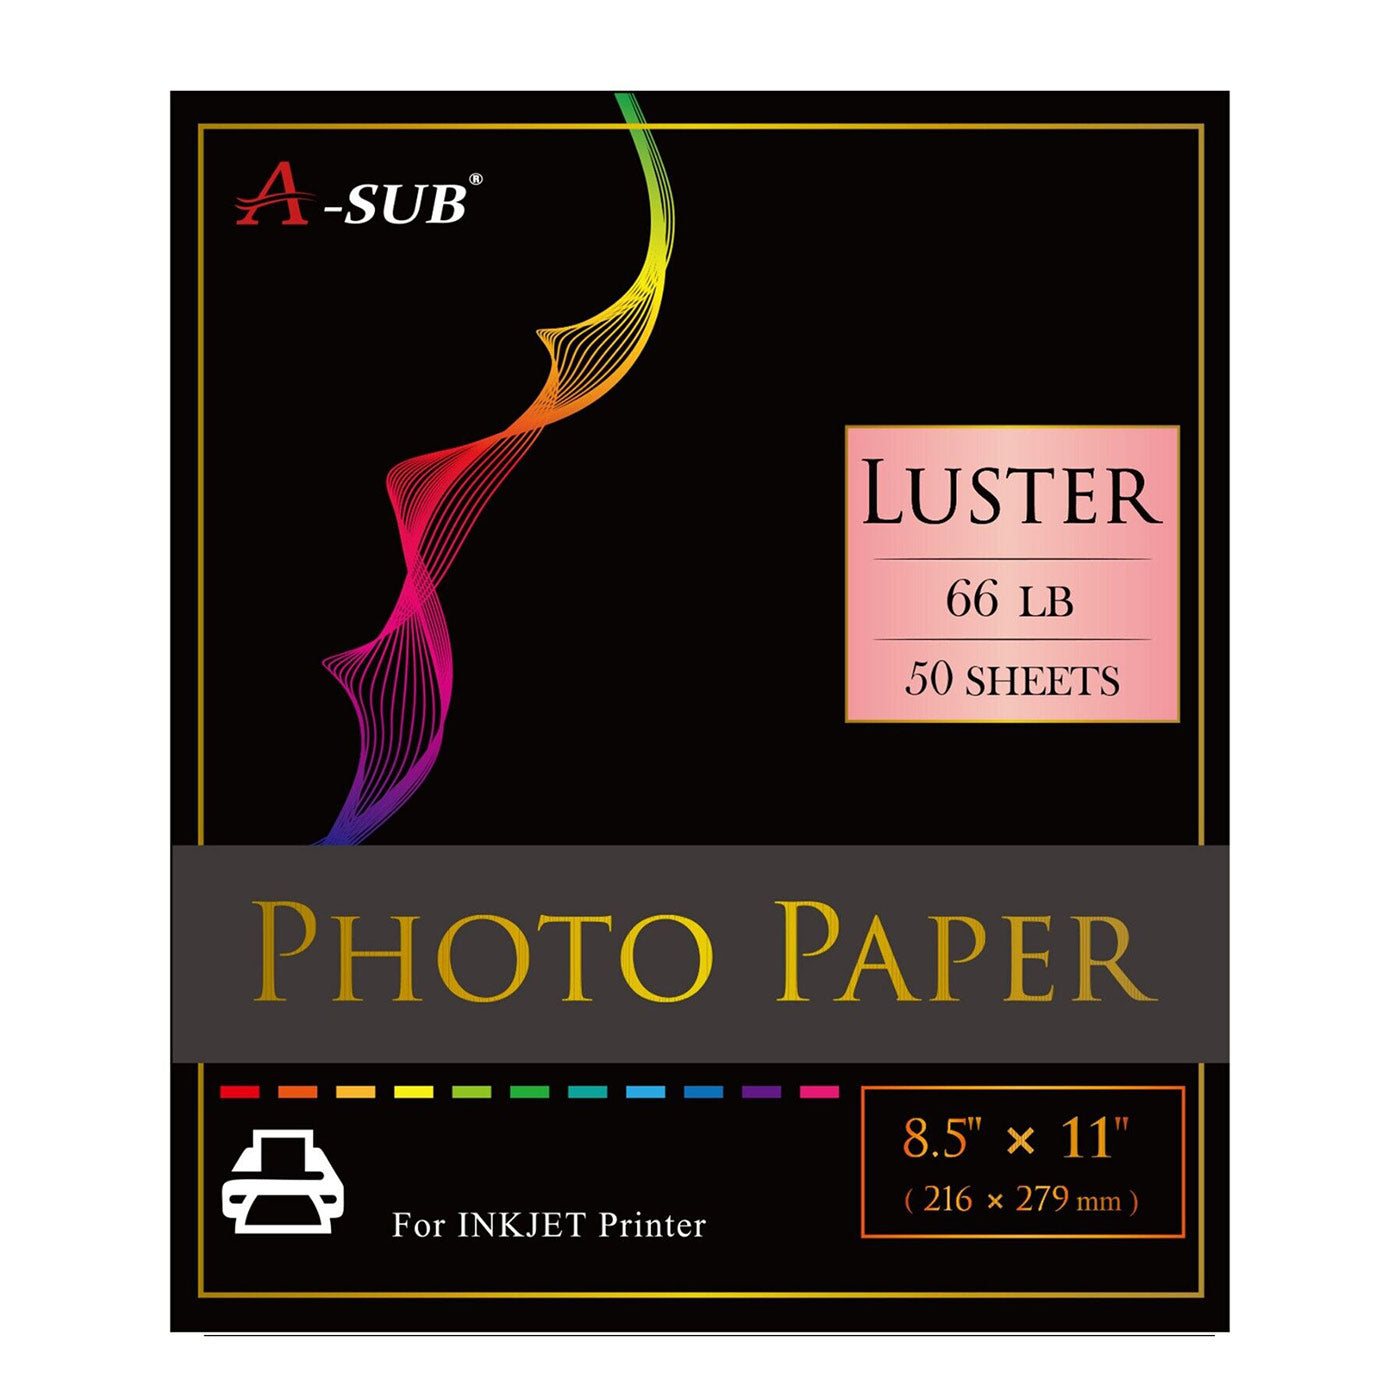 A-SUB RC Photo Paper Luster 250gsm 66lb 8.5X11 inches 50 Sheets